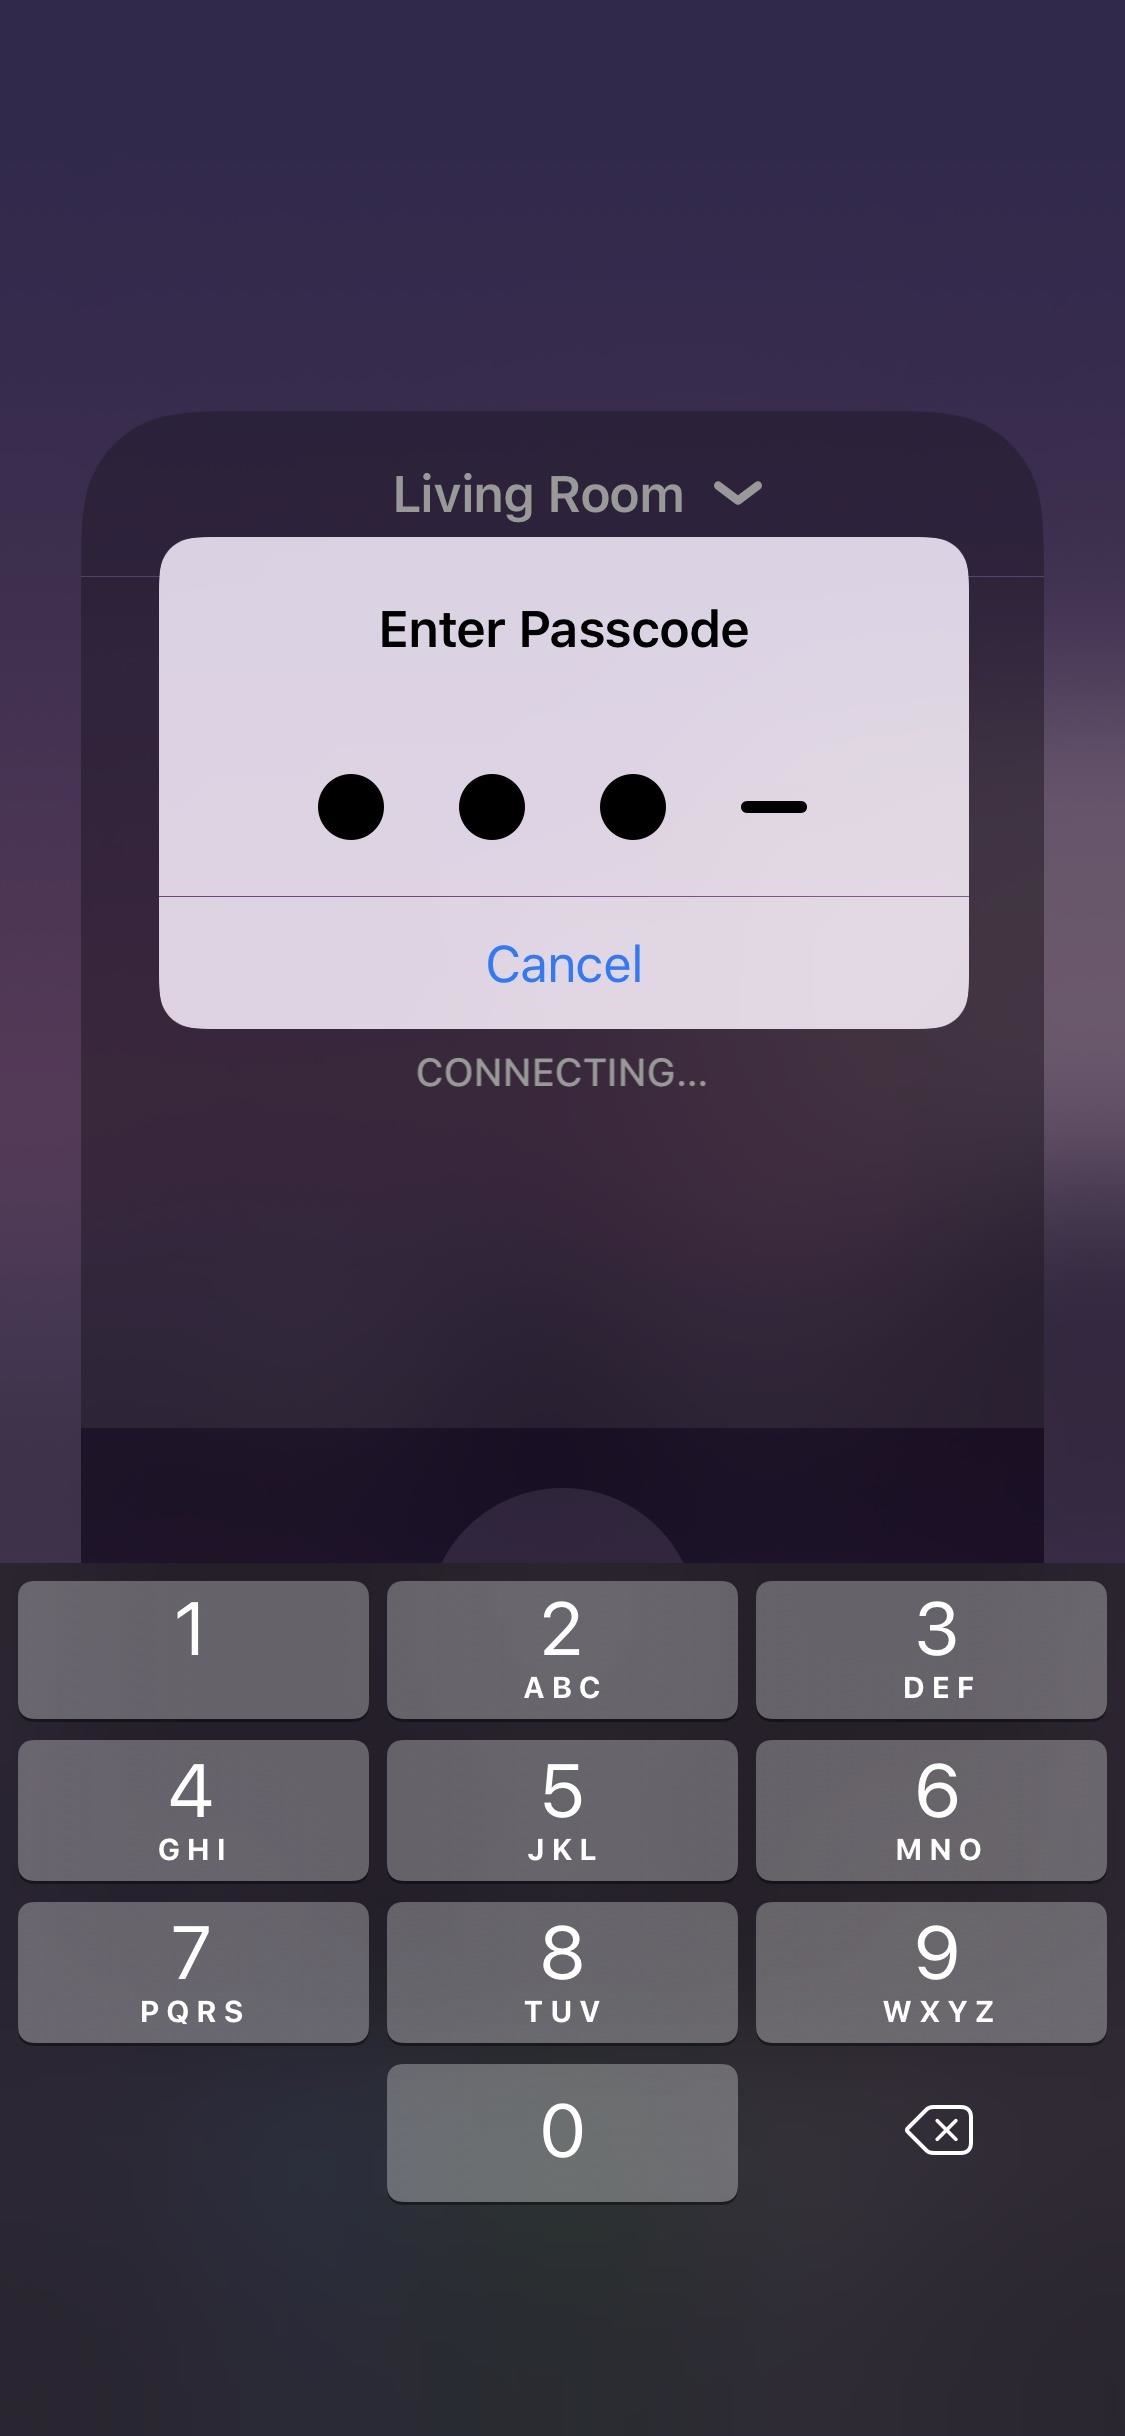 How to Control Your Apple TV with Just Your iPhone